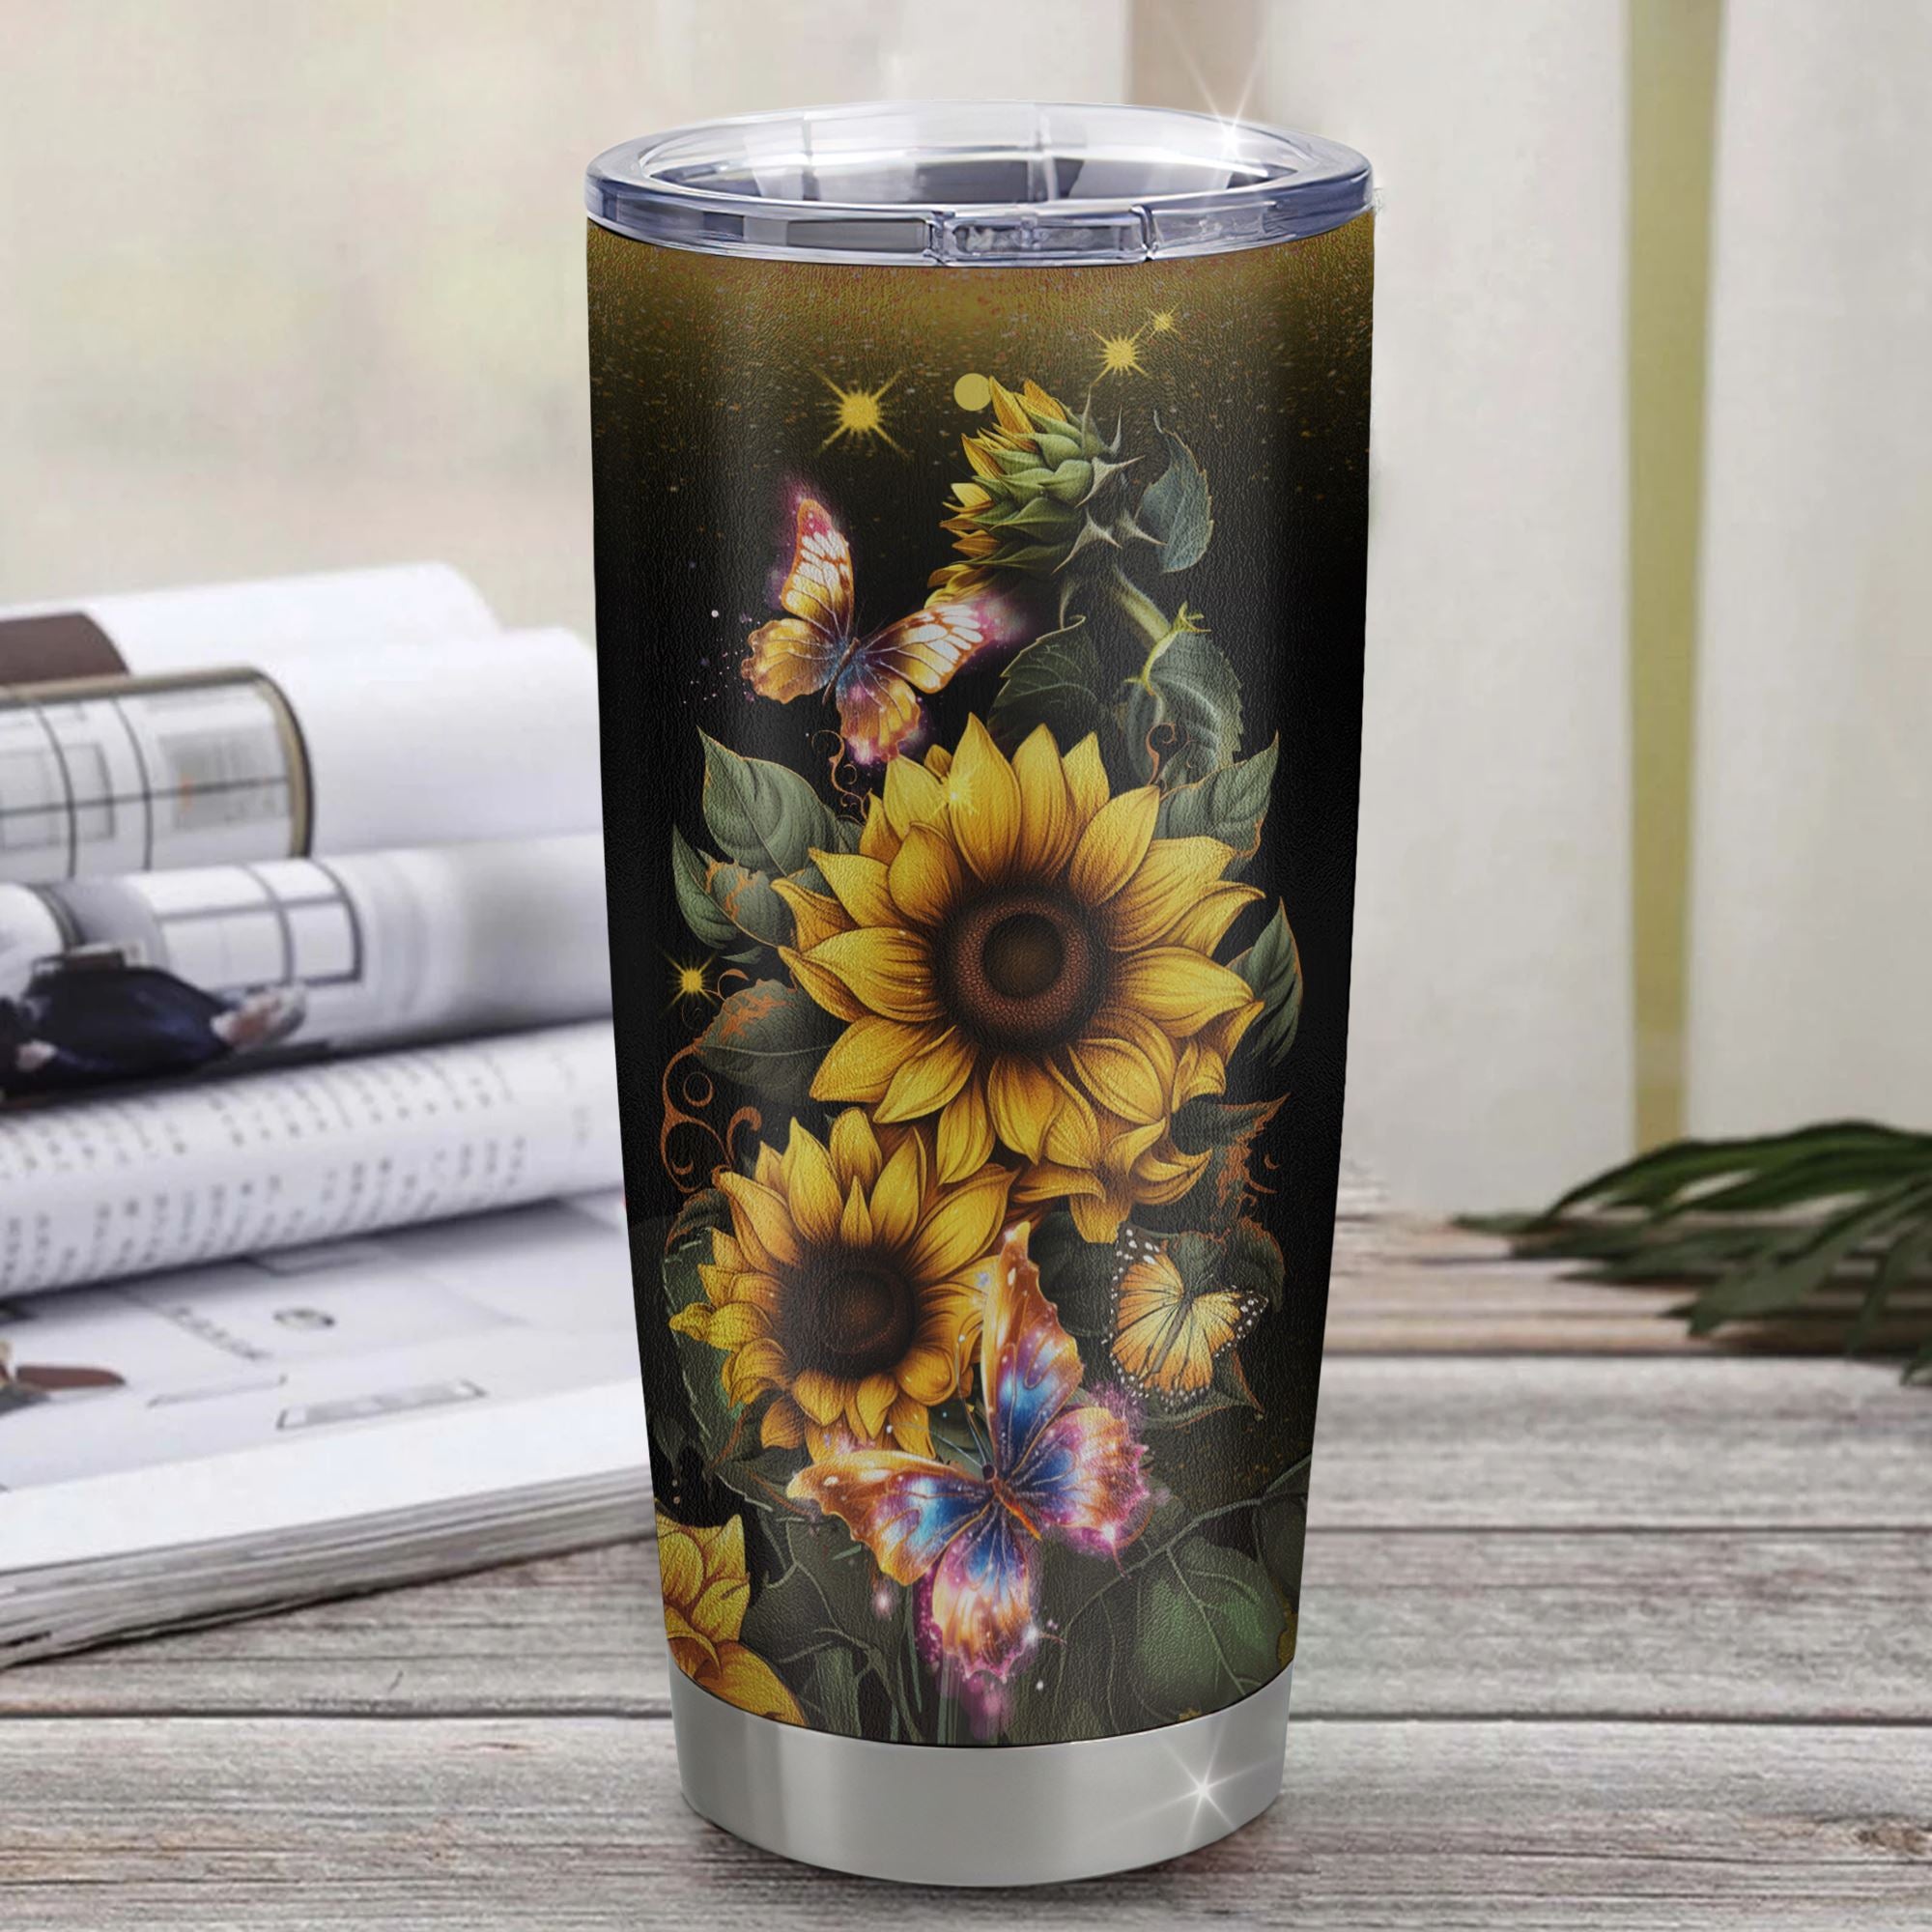 Personal Name Sunflower Heart - Engraved Stainless Steel Sunflower Tumbler,  Insulated Travel Mug, Cute Gift For Her